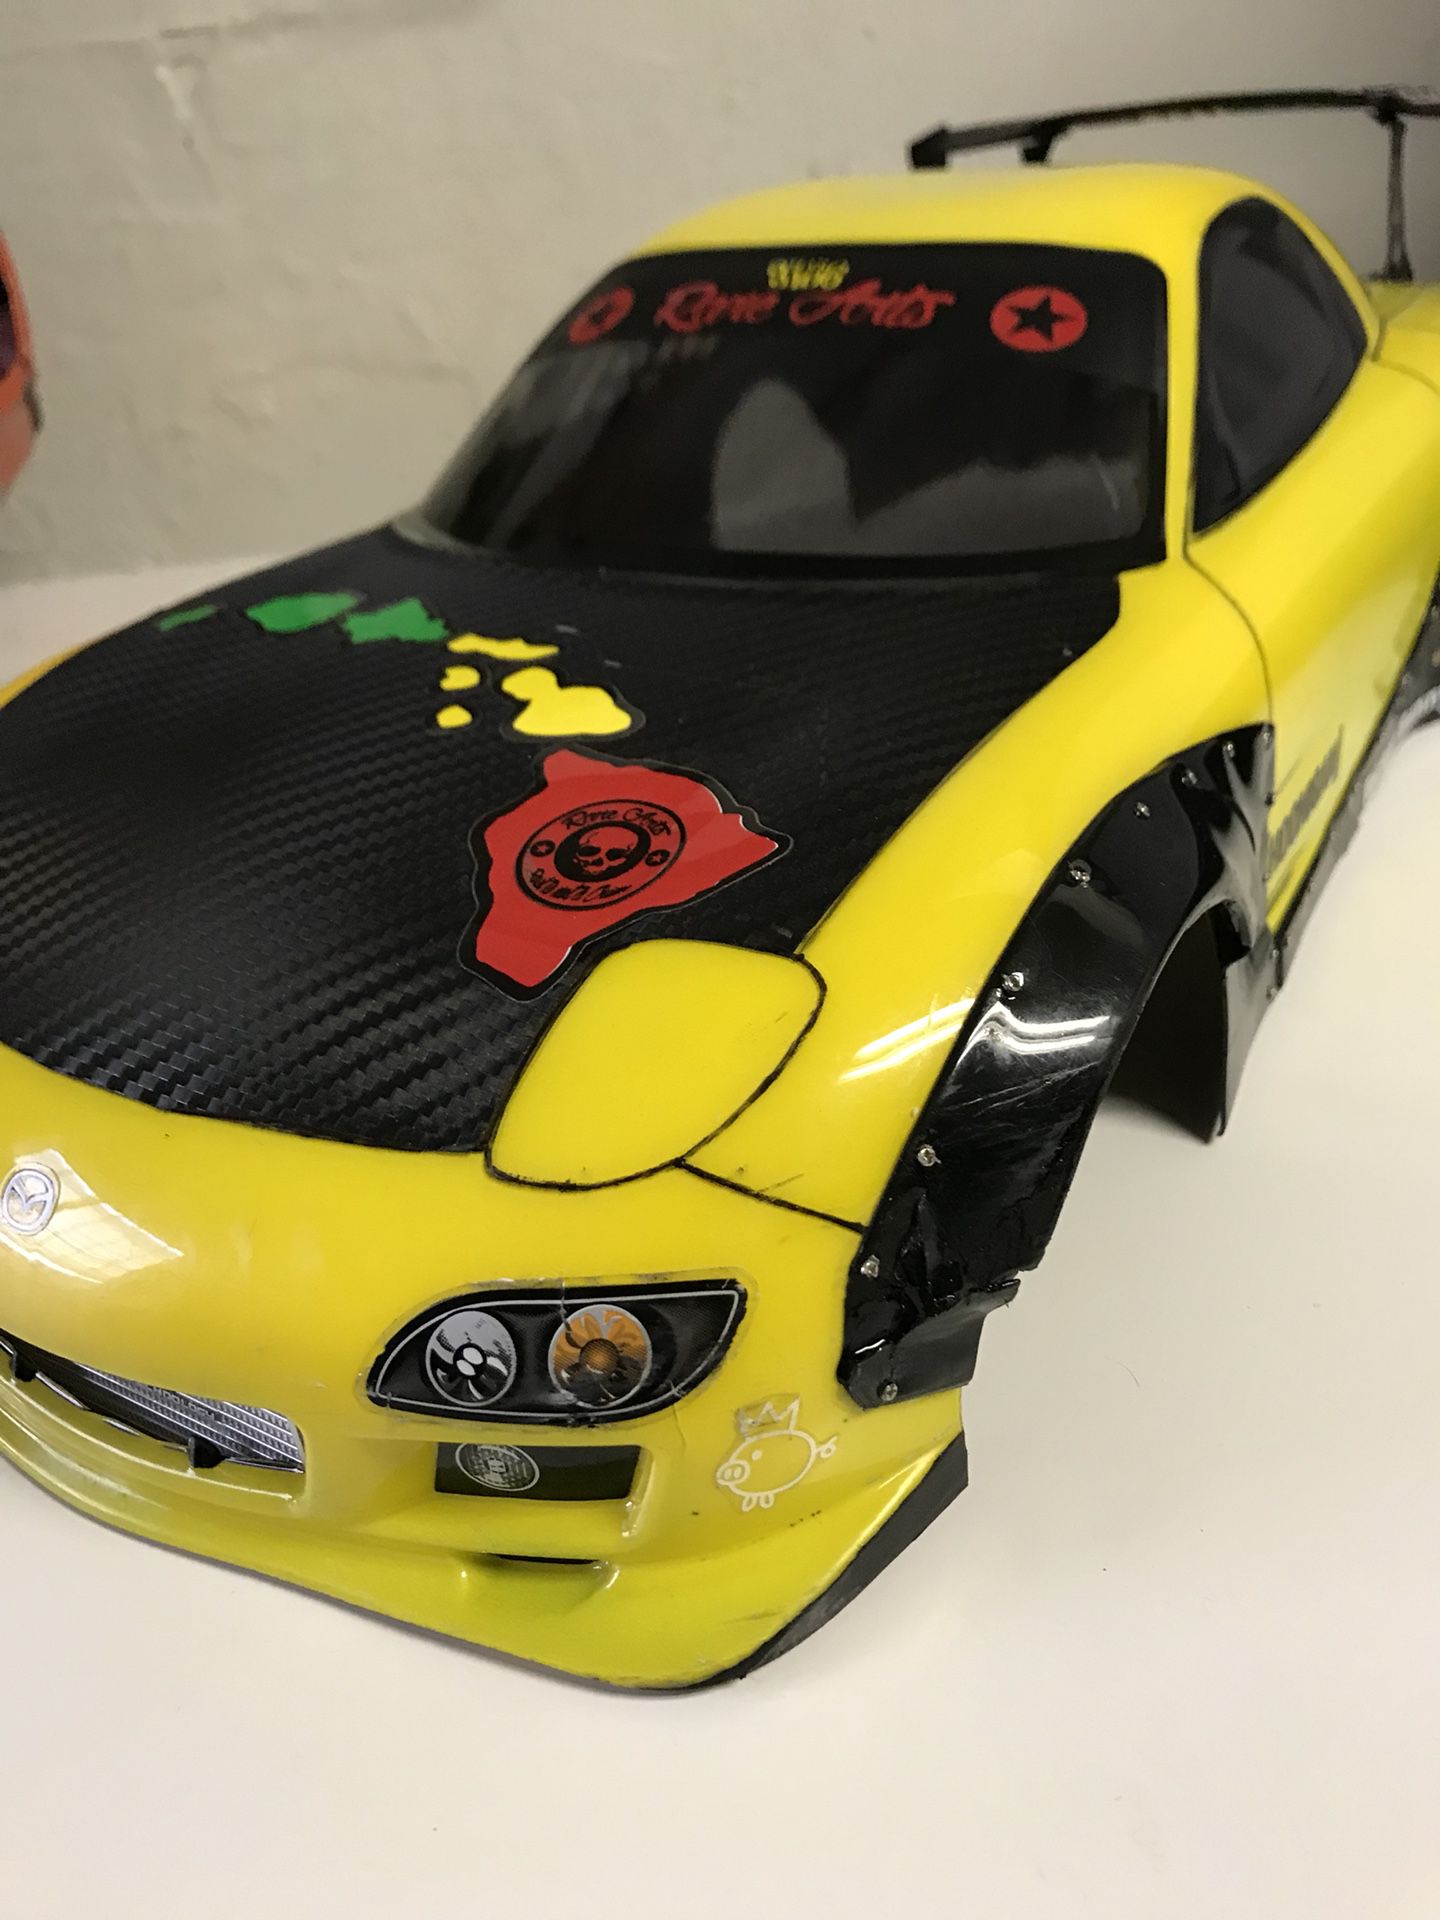 Tt-02 Chissis/ Rocket Bunny/ 10th Scale Rc Drift Cars for Sale in Chandler,  AZ - OfferUp